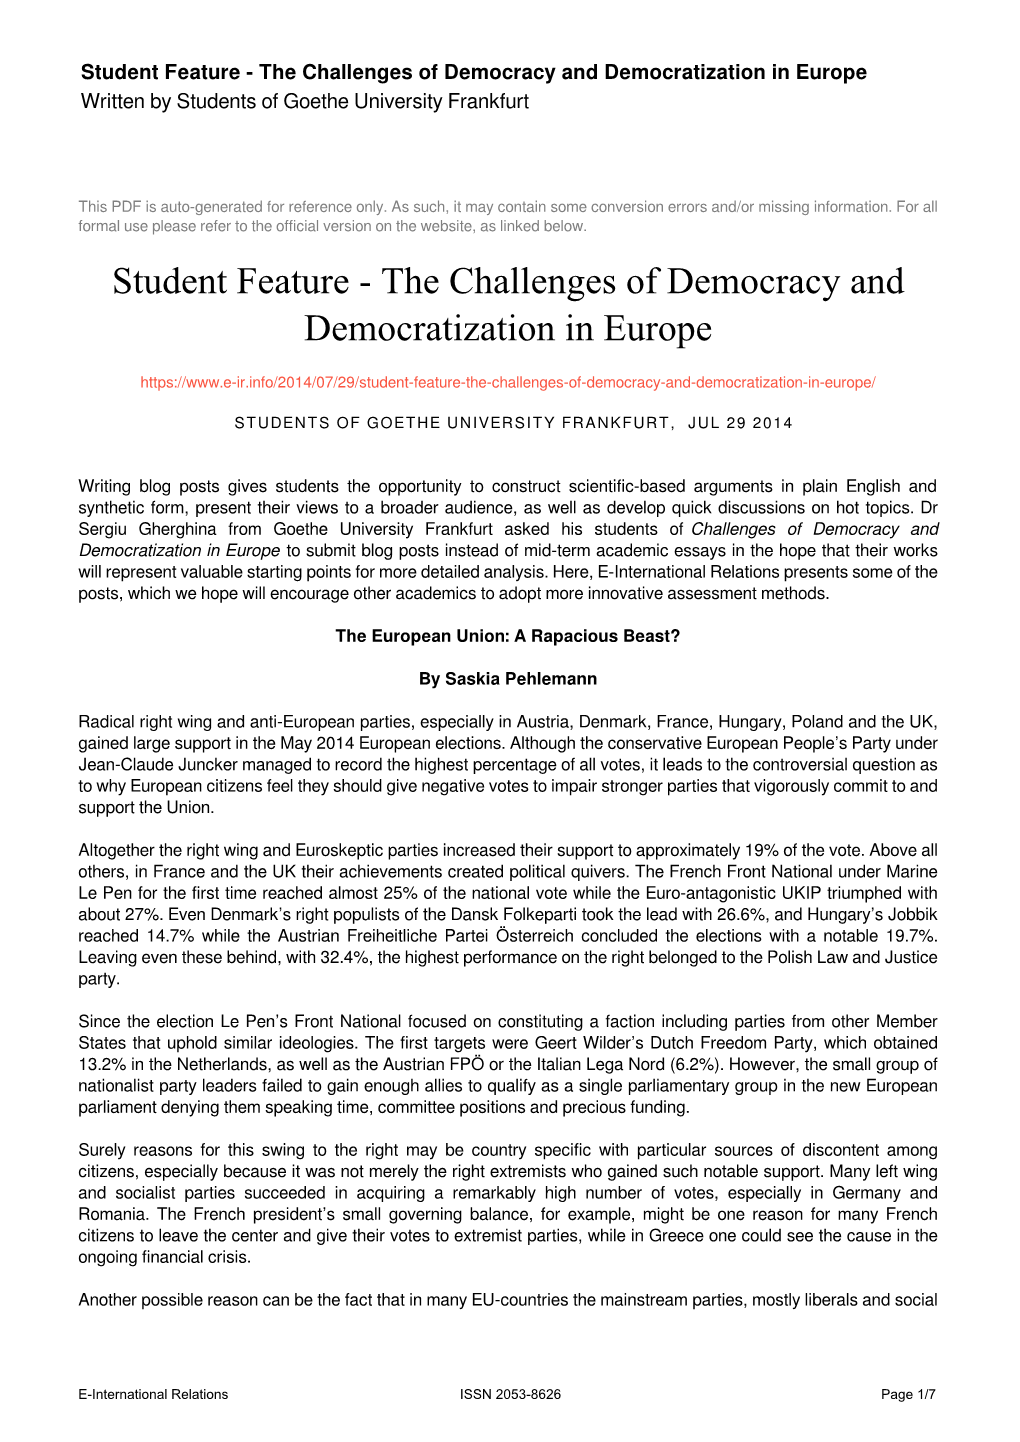 The Challenges of Democracy and Democratization in Europe Written by Students of Goethe University Frankfurt